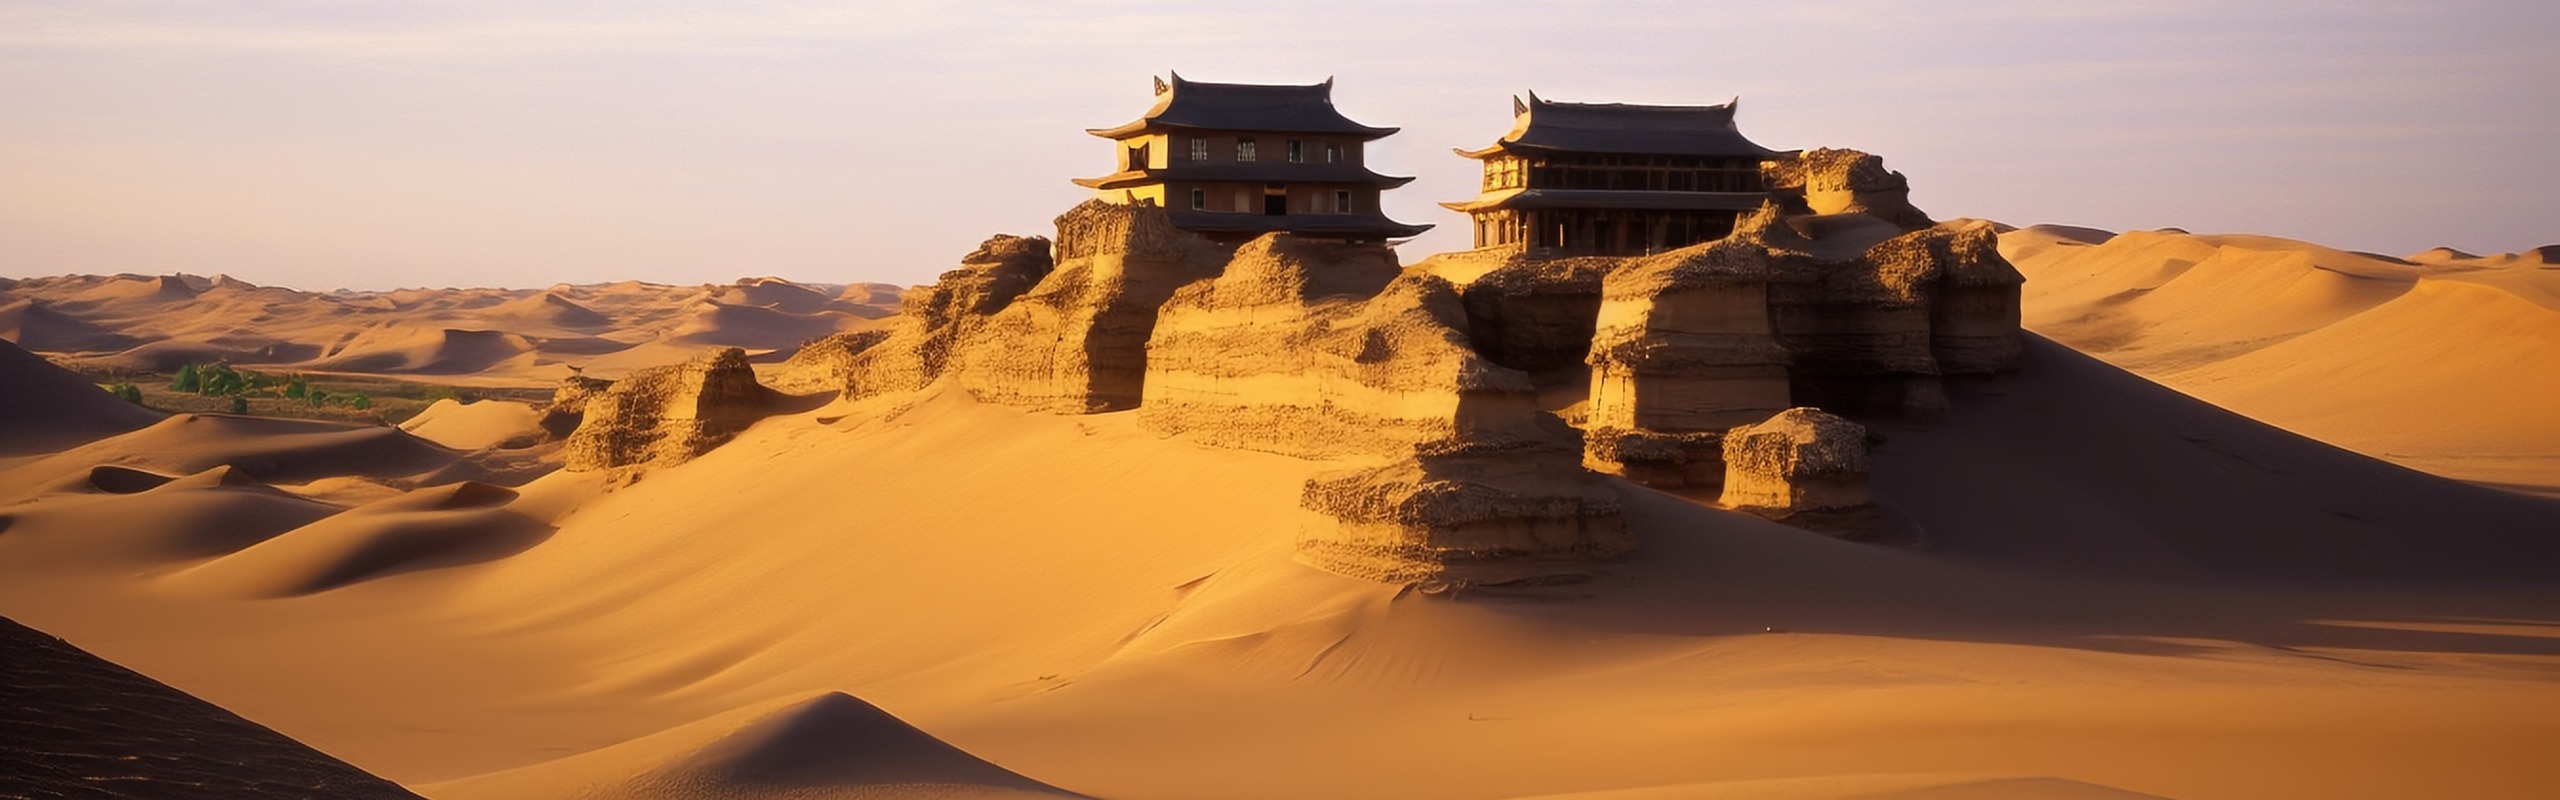 21-Day China Tour with Silk Road 